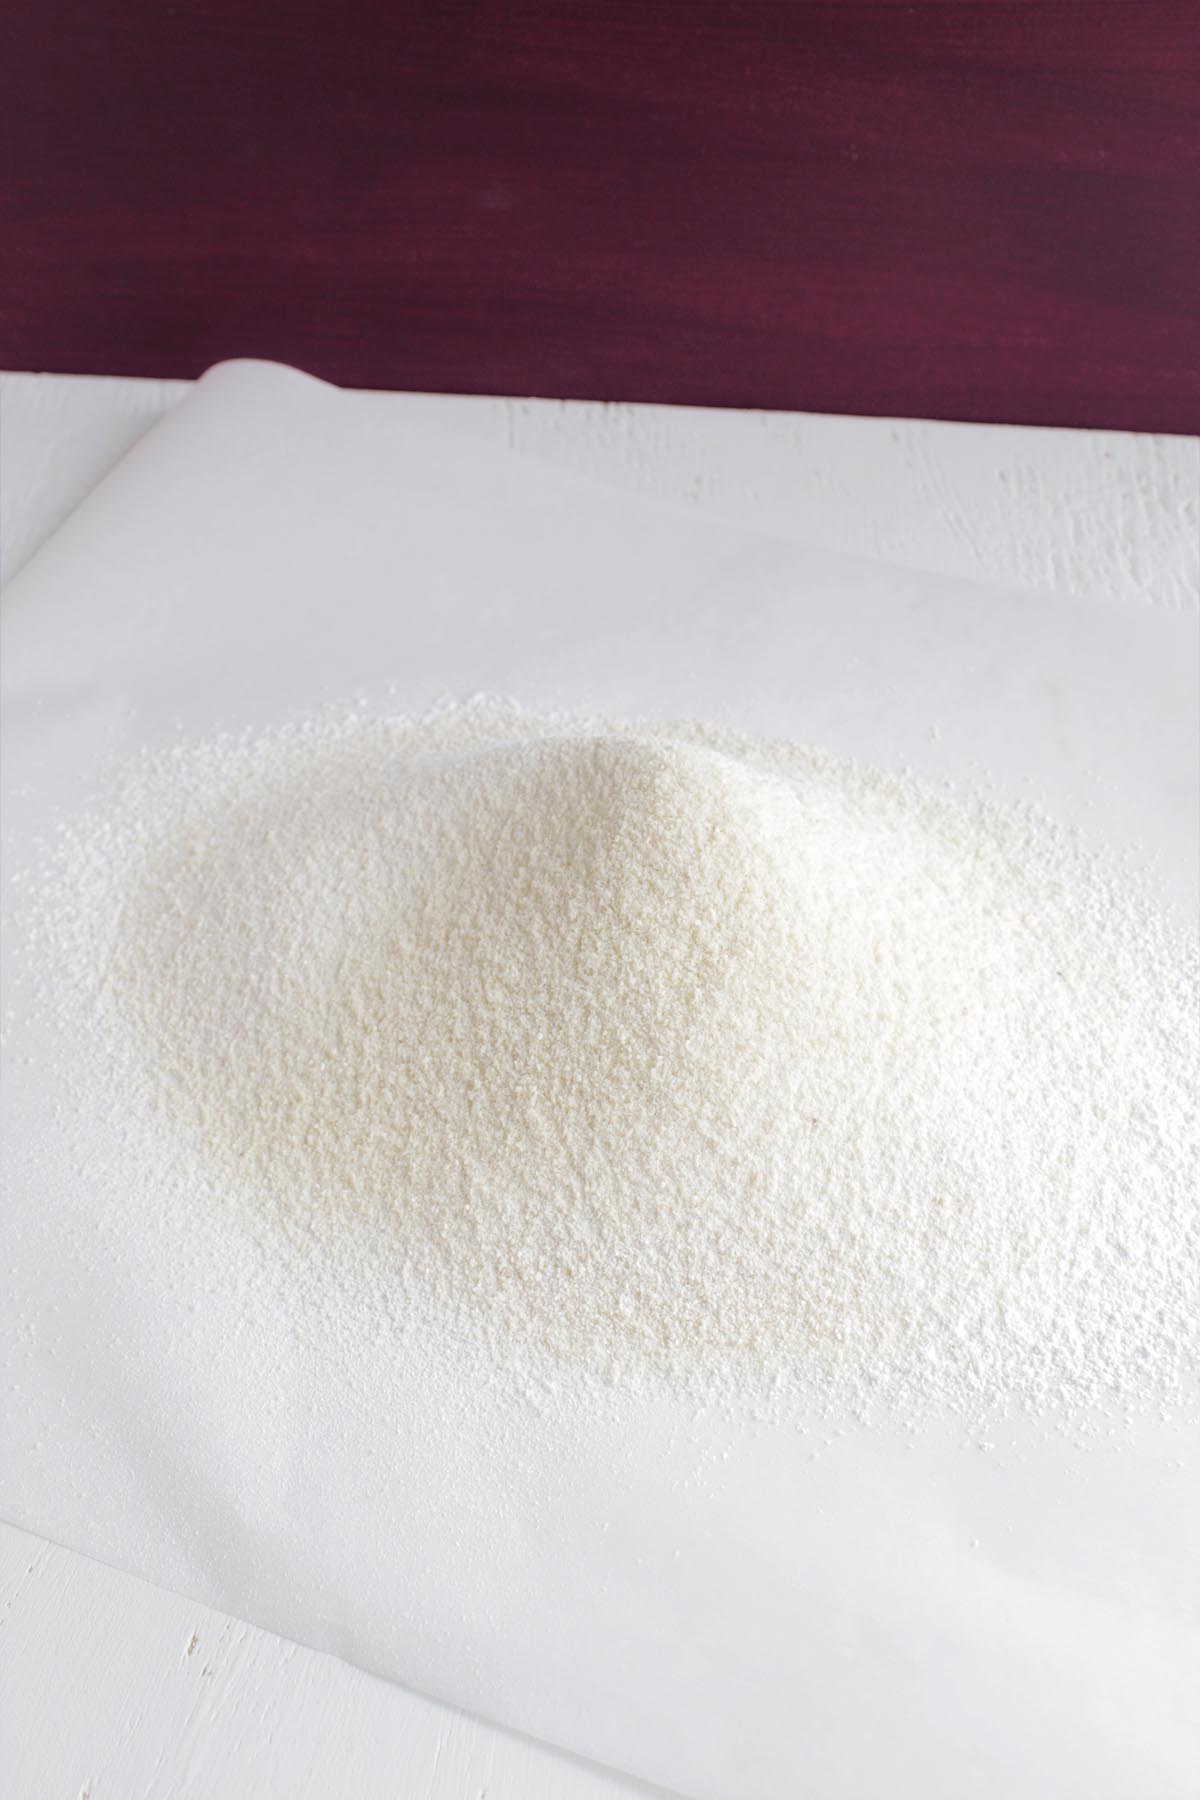 Sifted almost flour and confectioners' sugar on parchment paper.